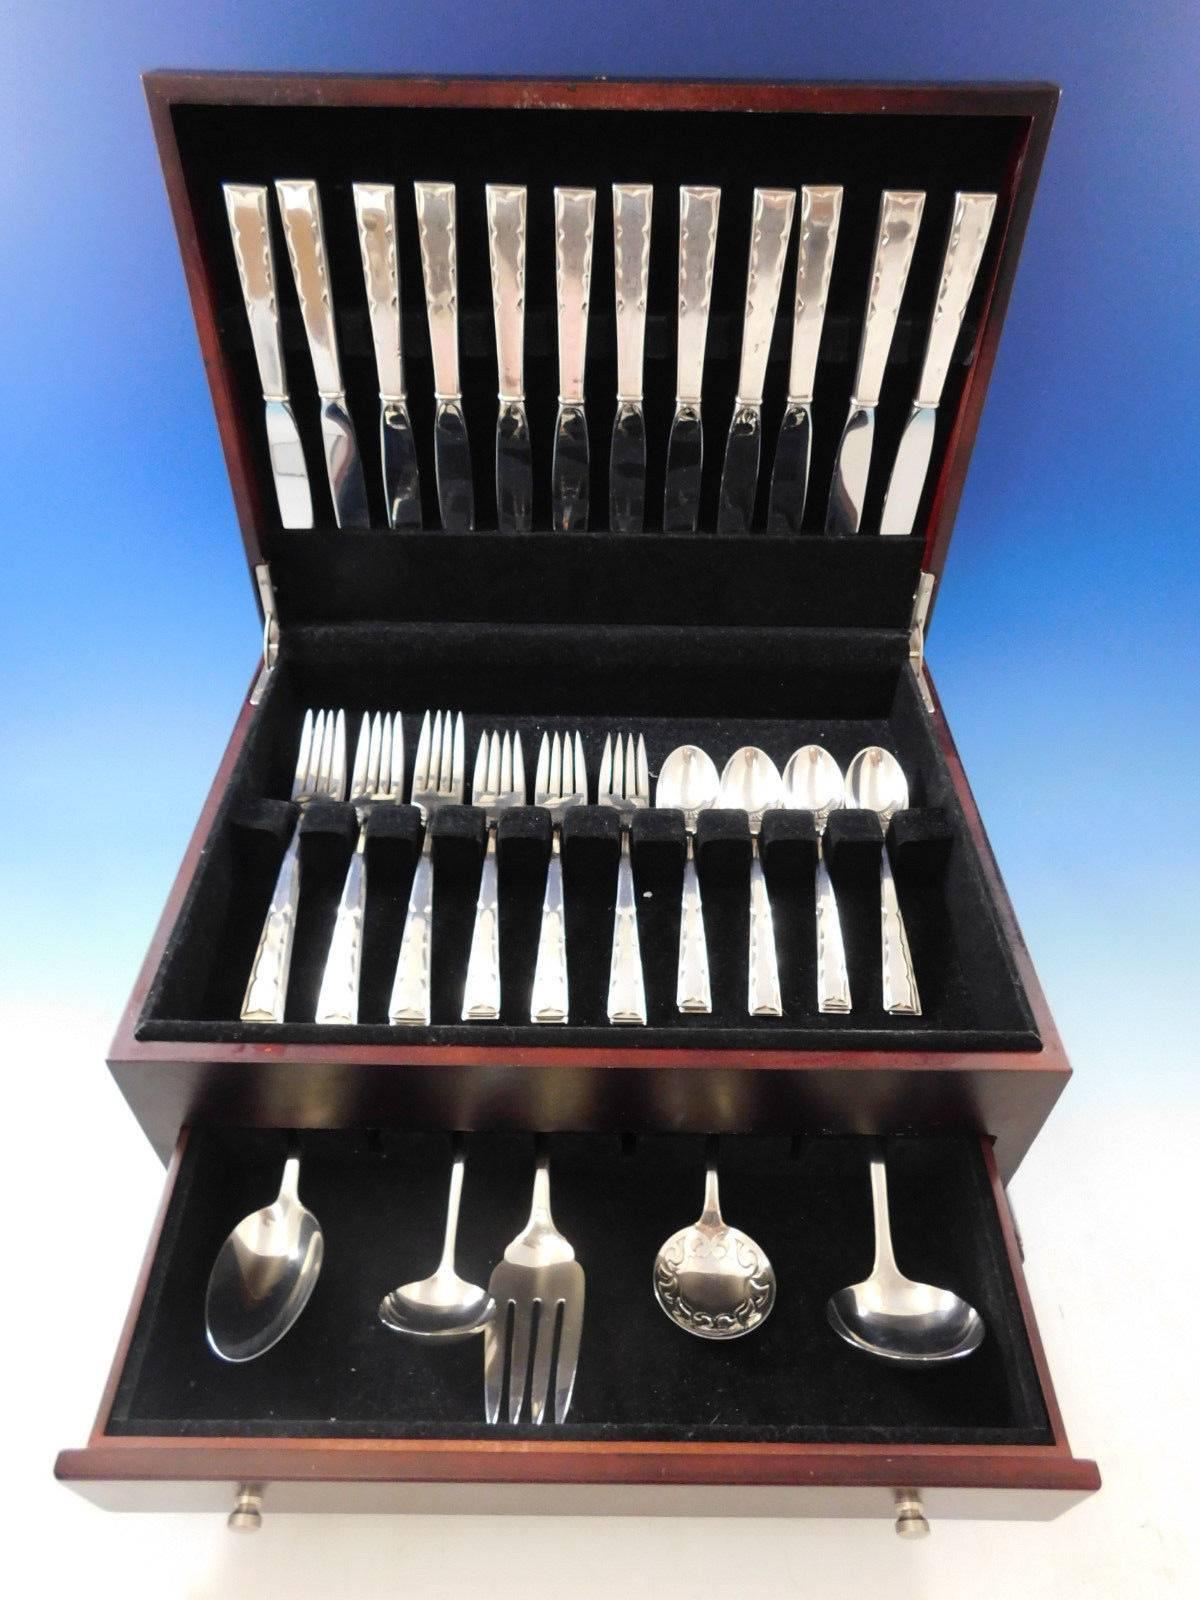 Skylark by Kirk Stieff, circa 1954 sterling silver flatware set, 53 pieces. This set has a very unique look and includes:

12 knives, 9